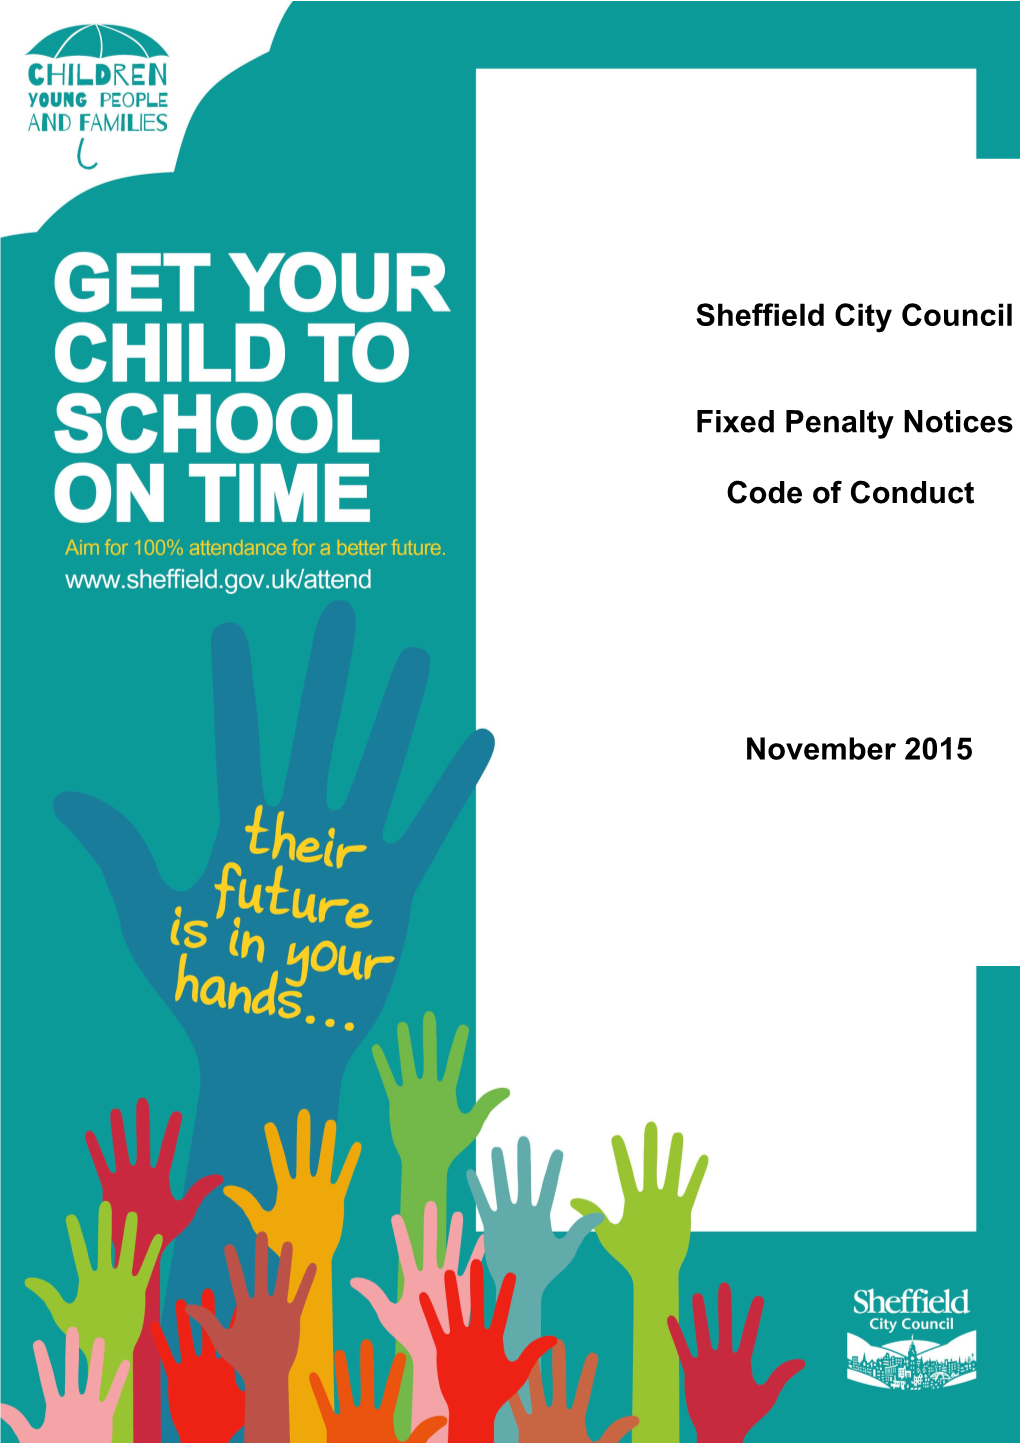 CODE of CONDUCT in RESPECT of the ISSUE of Penalty Notices For: Poor School Attendance